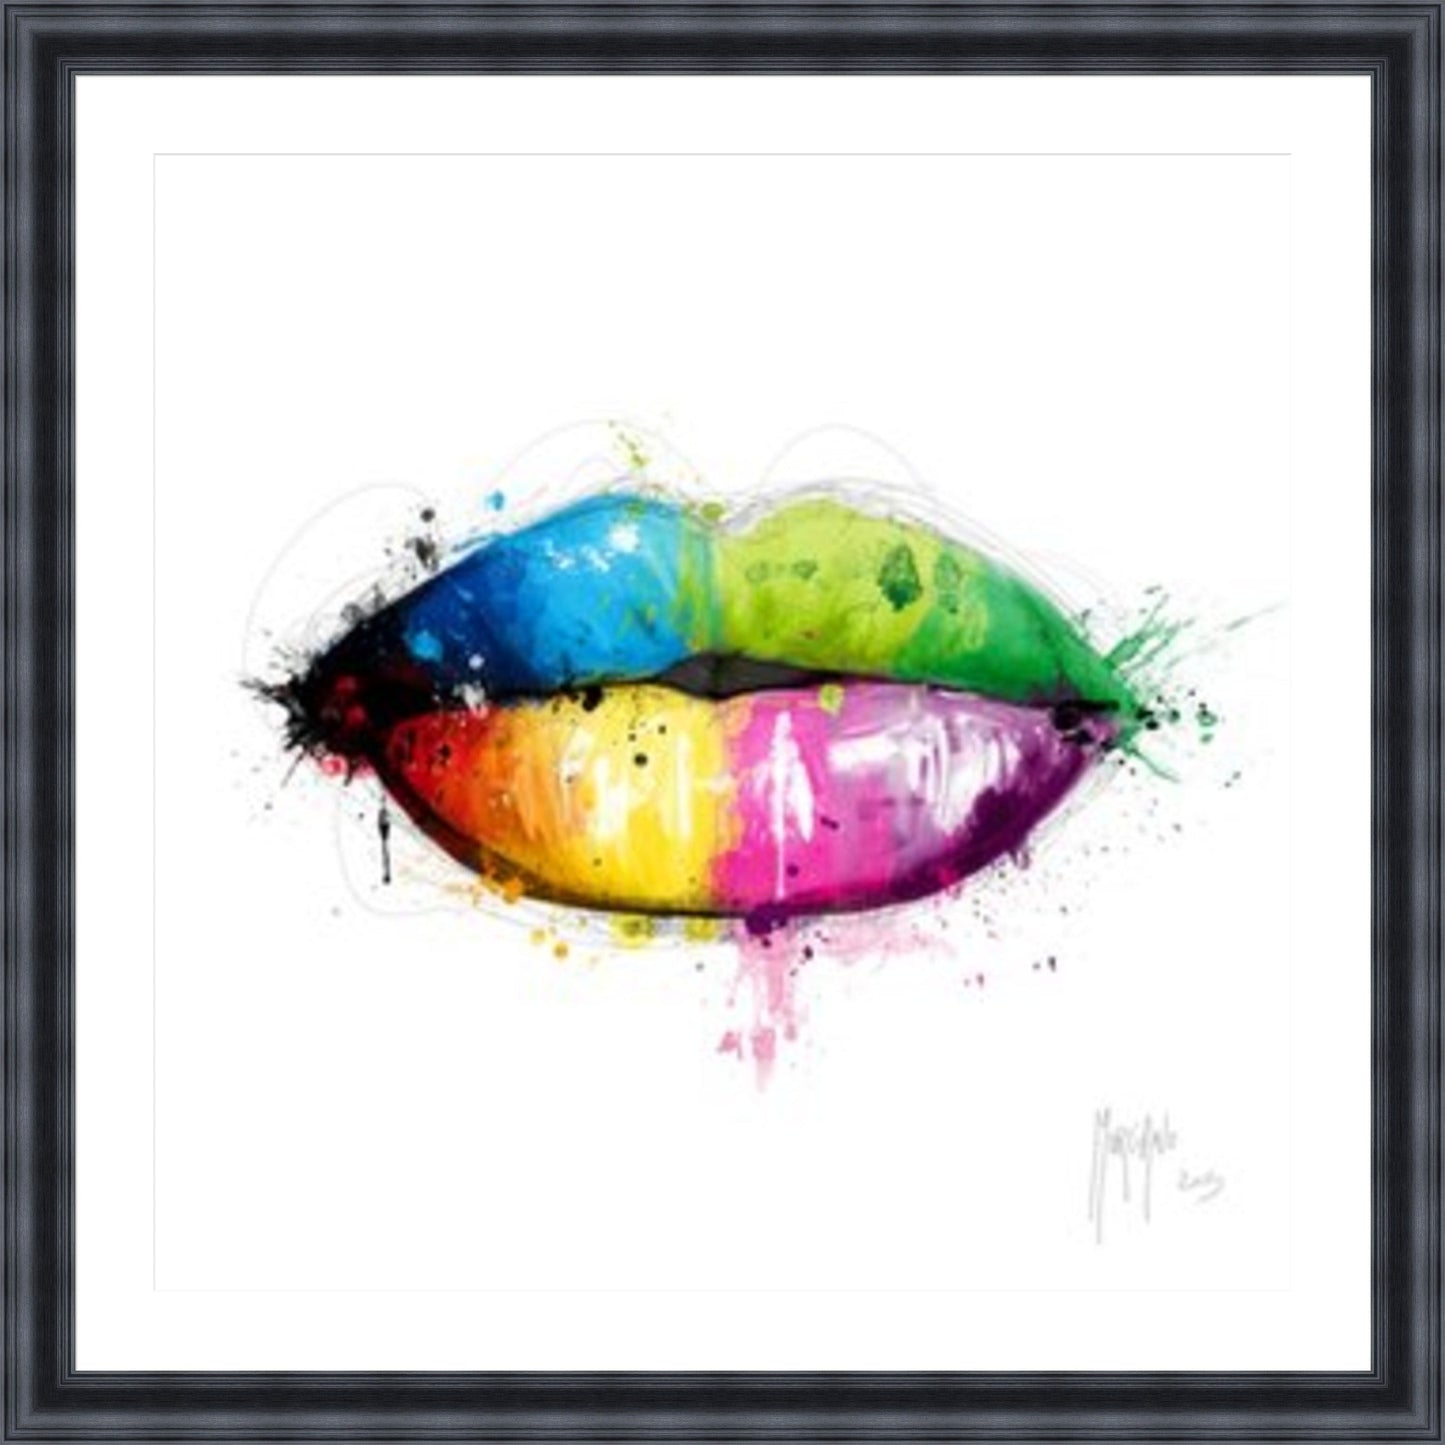 Candy Mouth (Lips) by Patrice Murciano